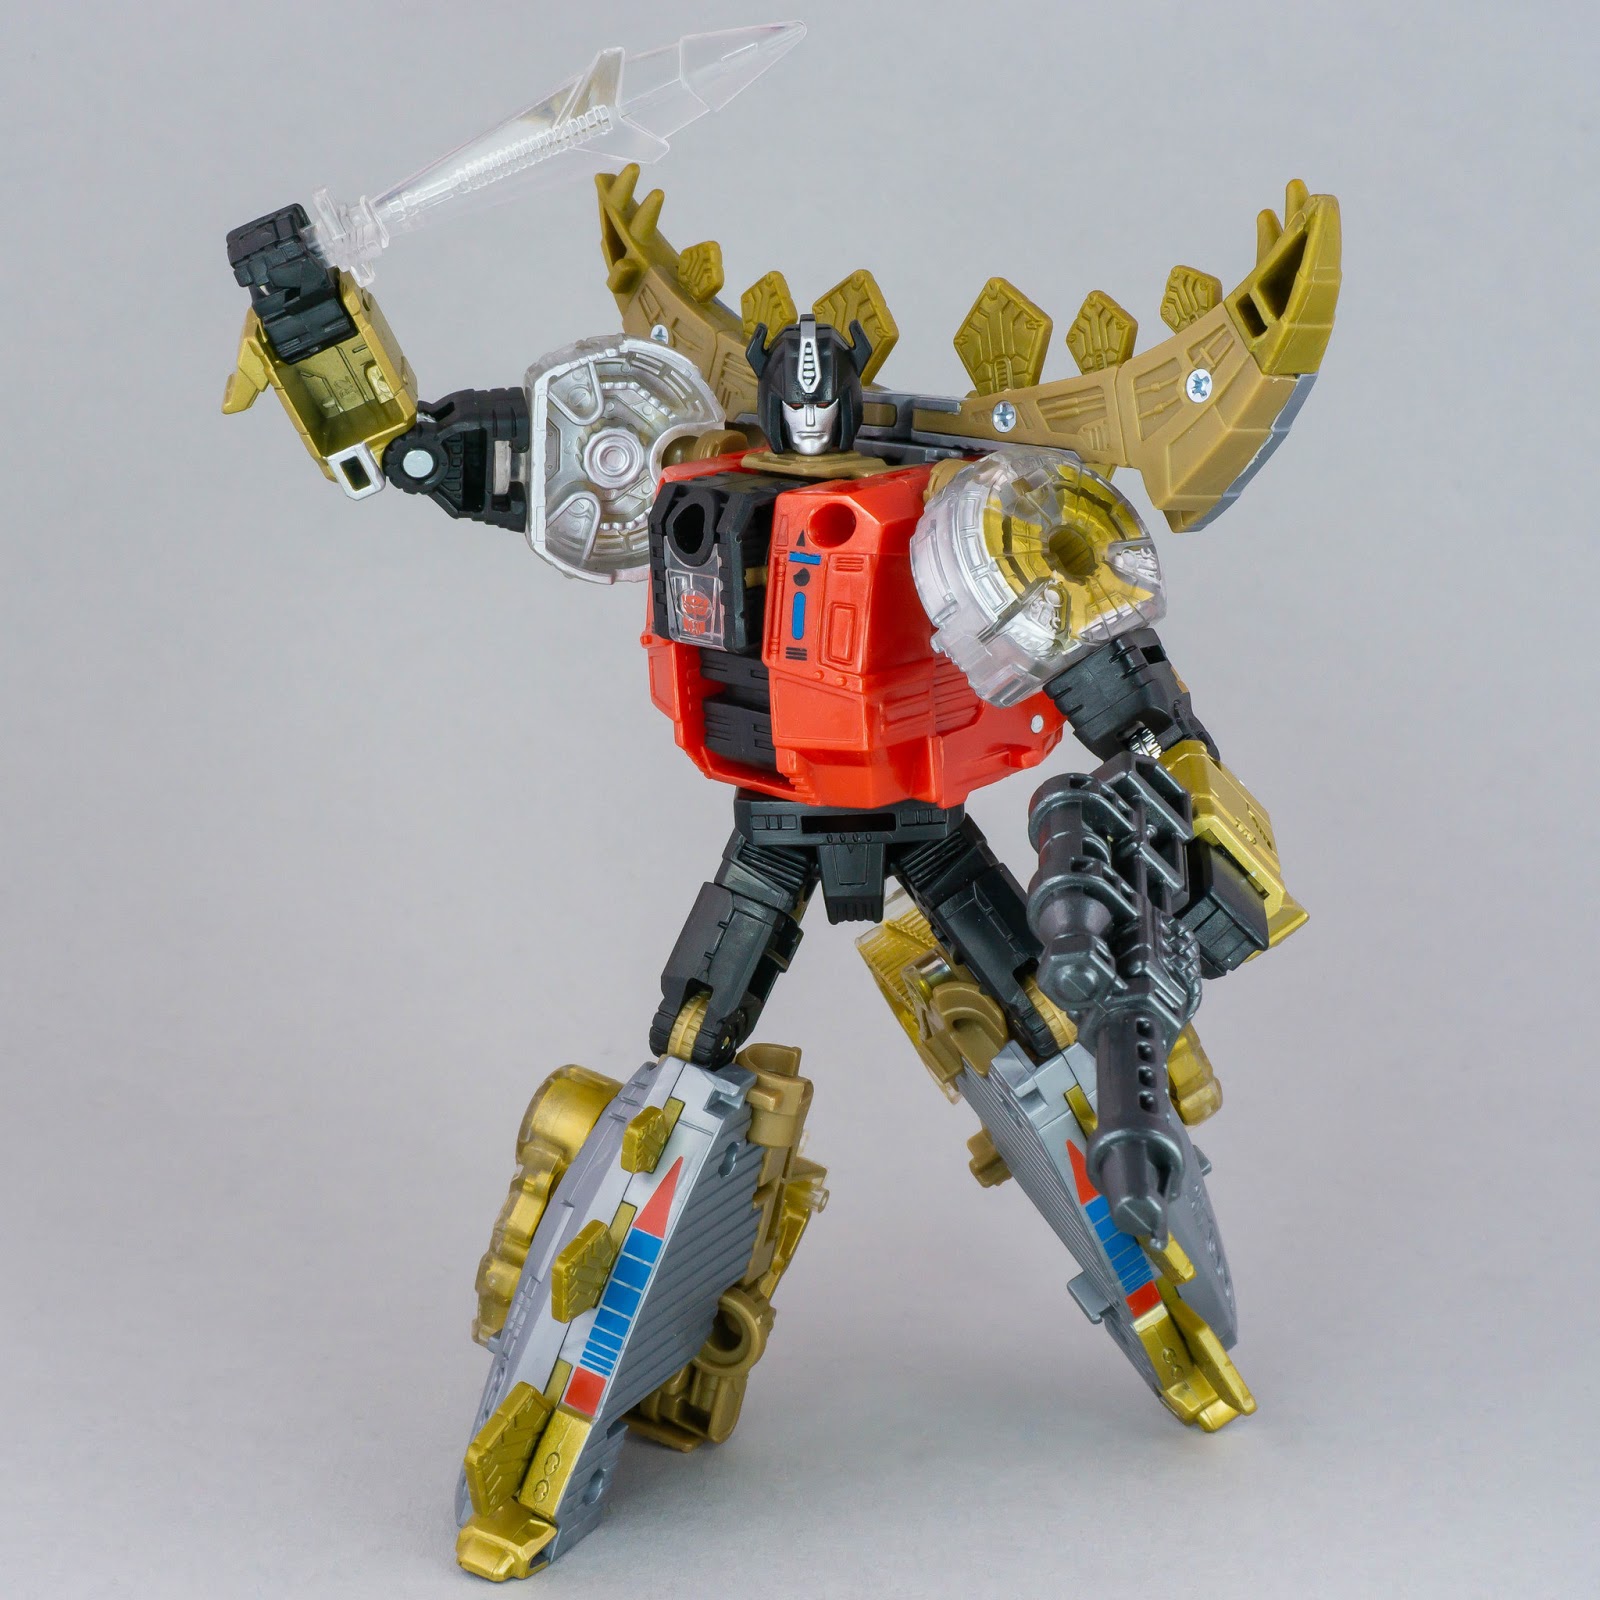 Transformers Power of the Primes Snarl robot mode posed 3